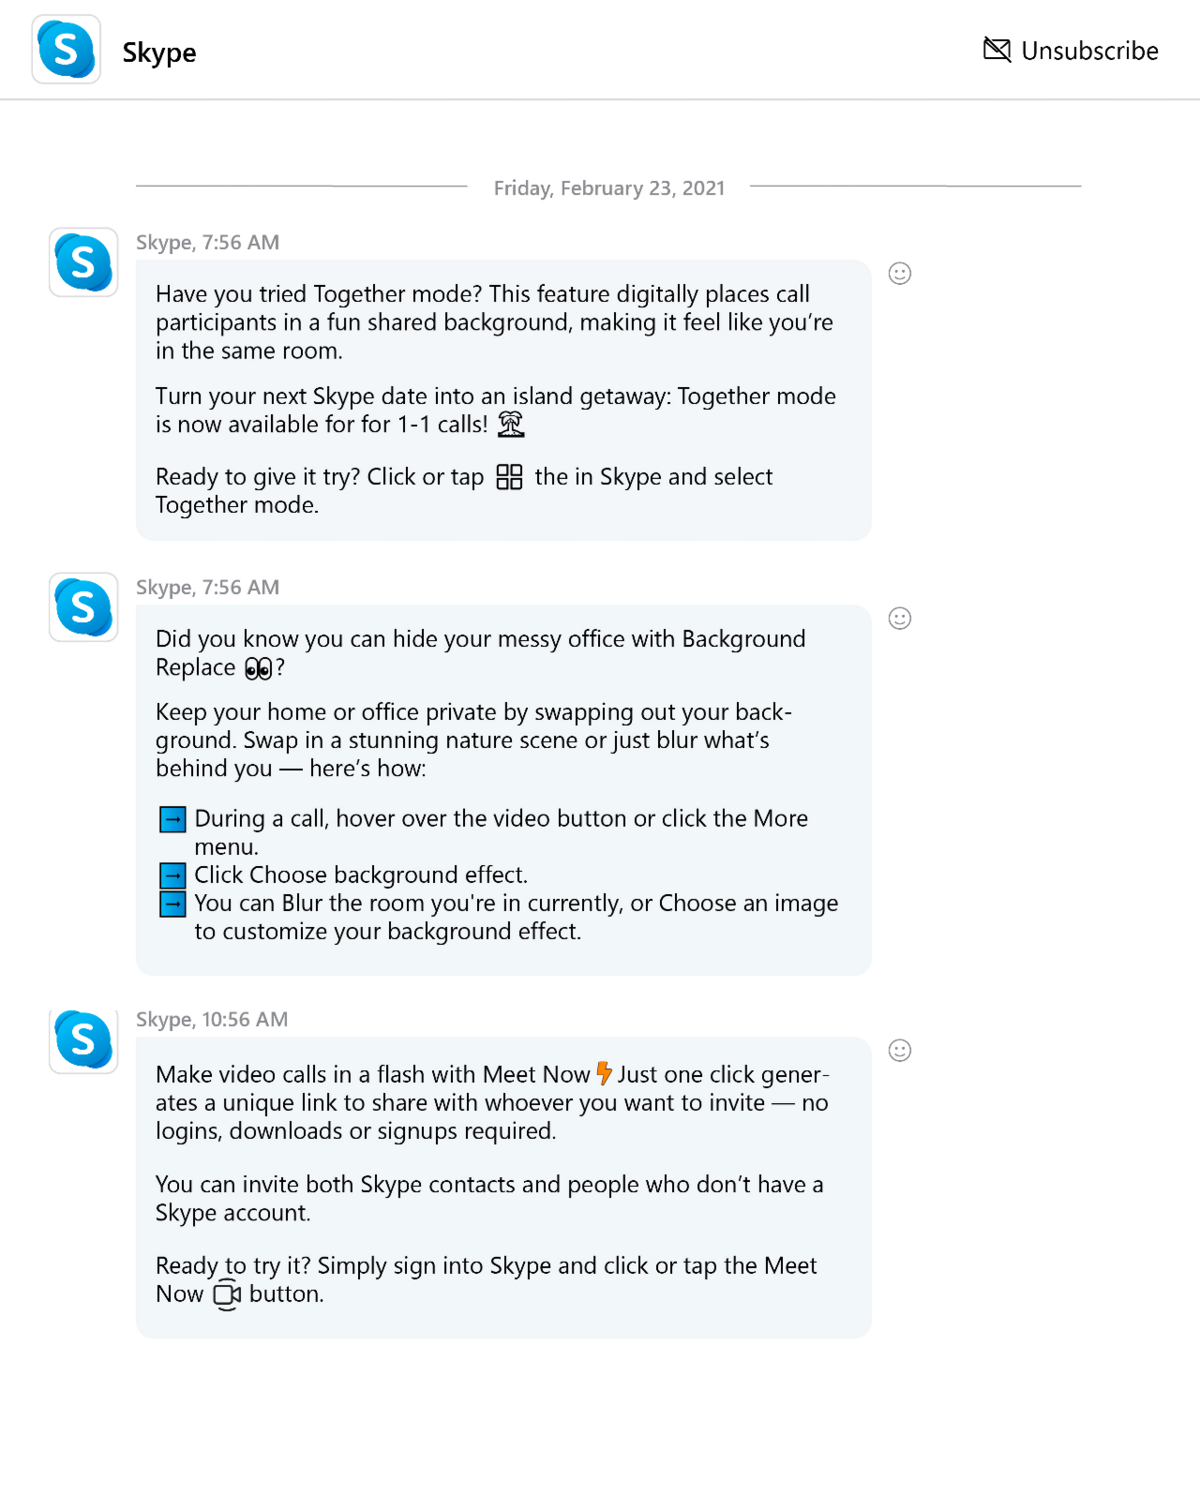 Skype chatbot compiled